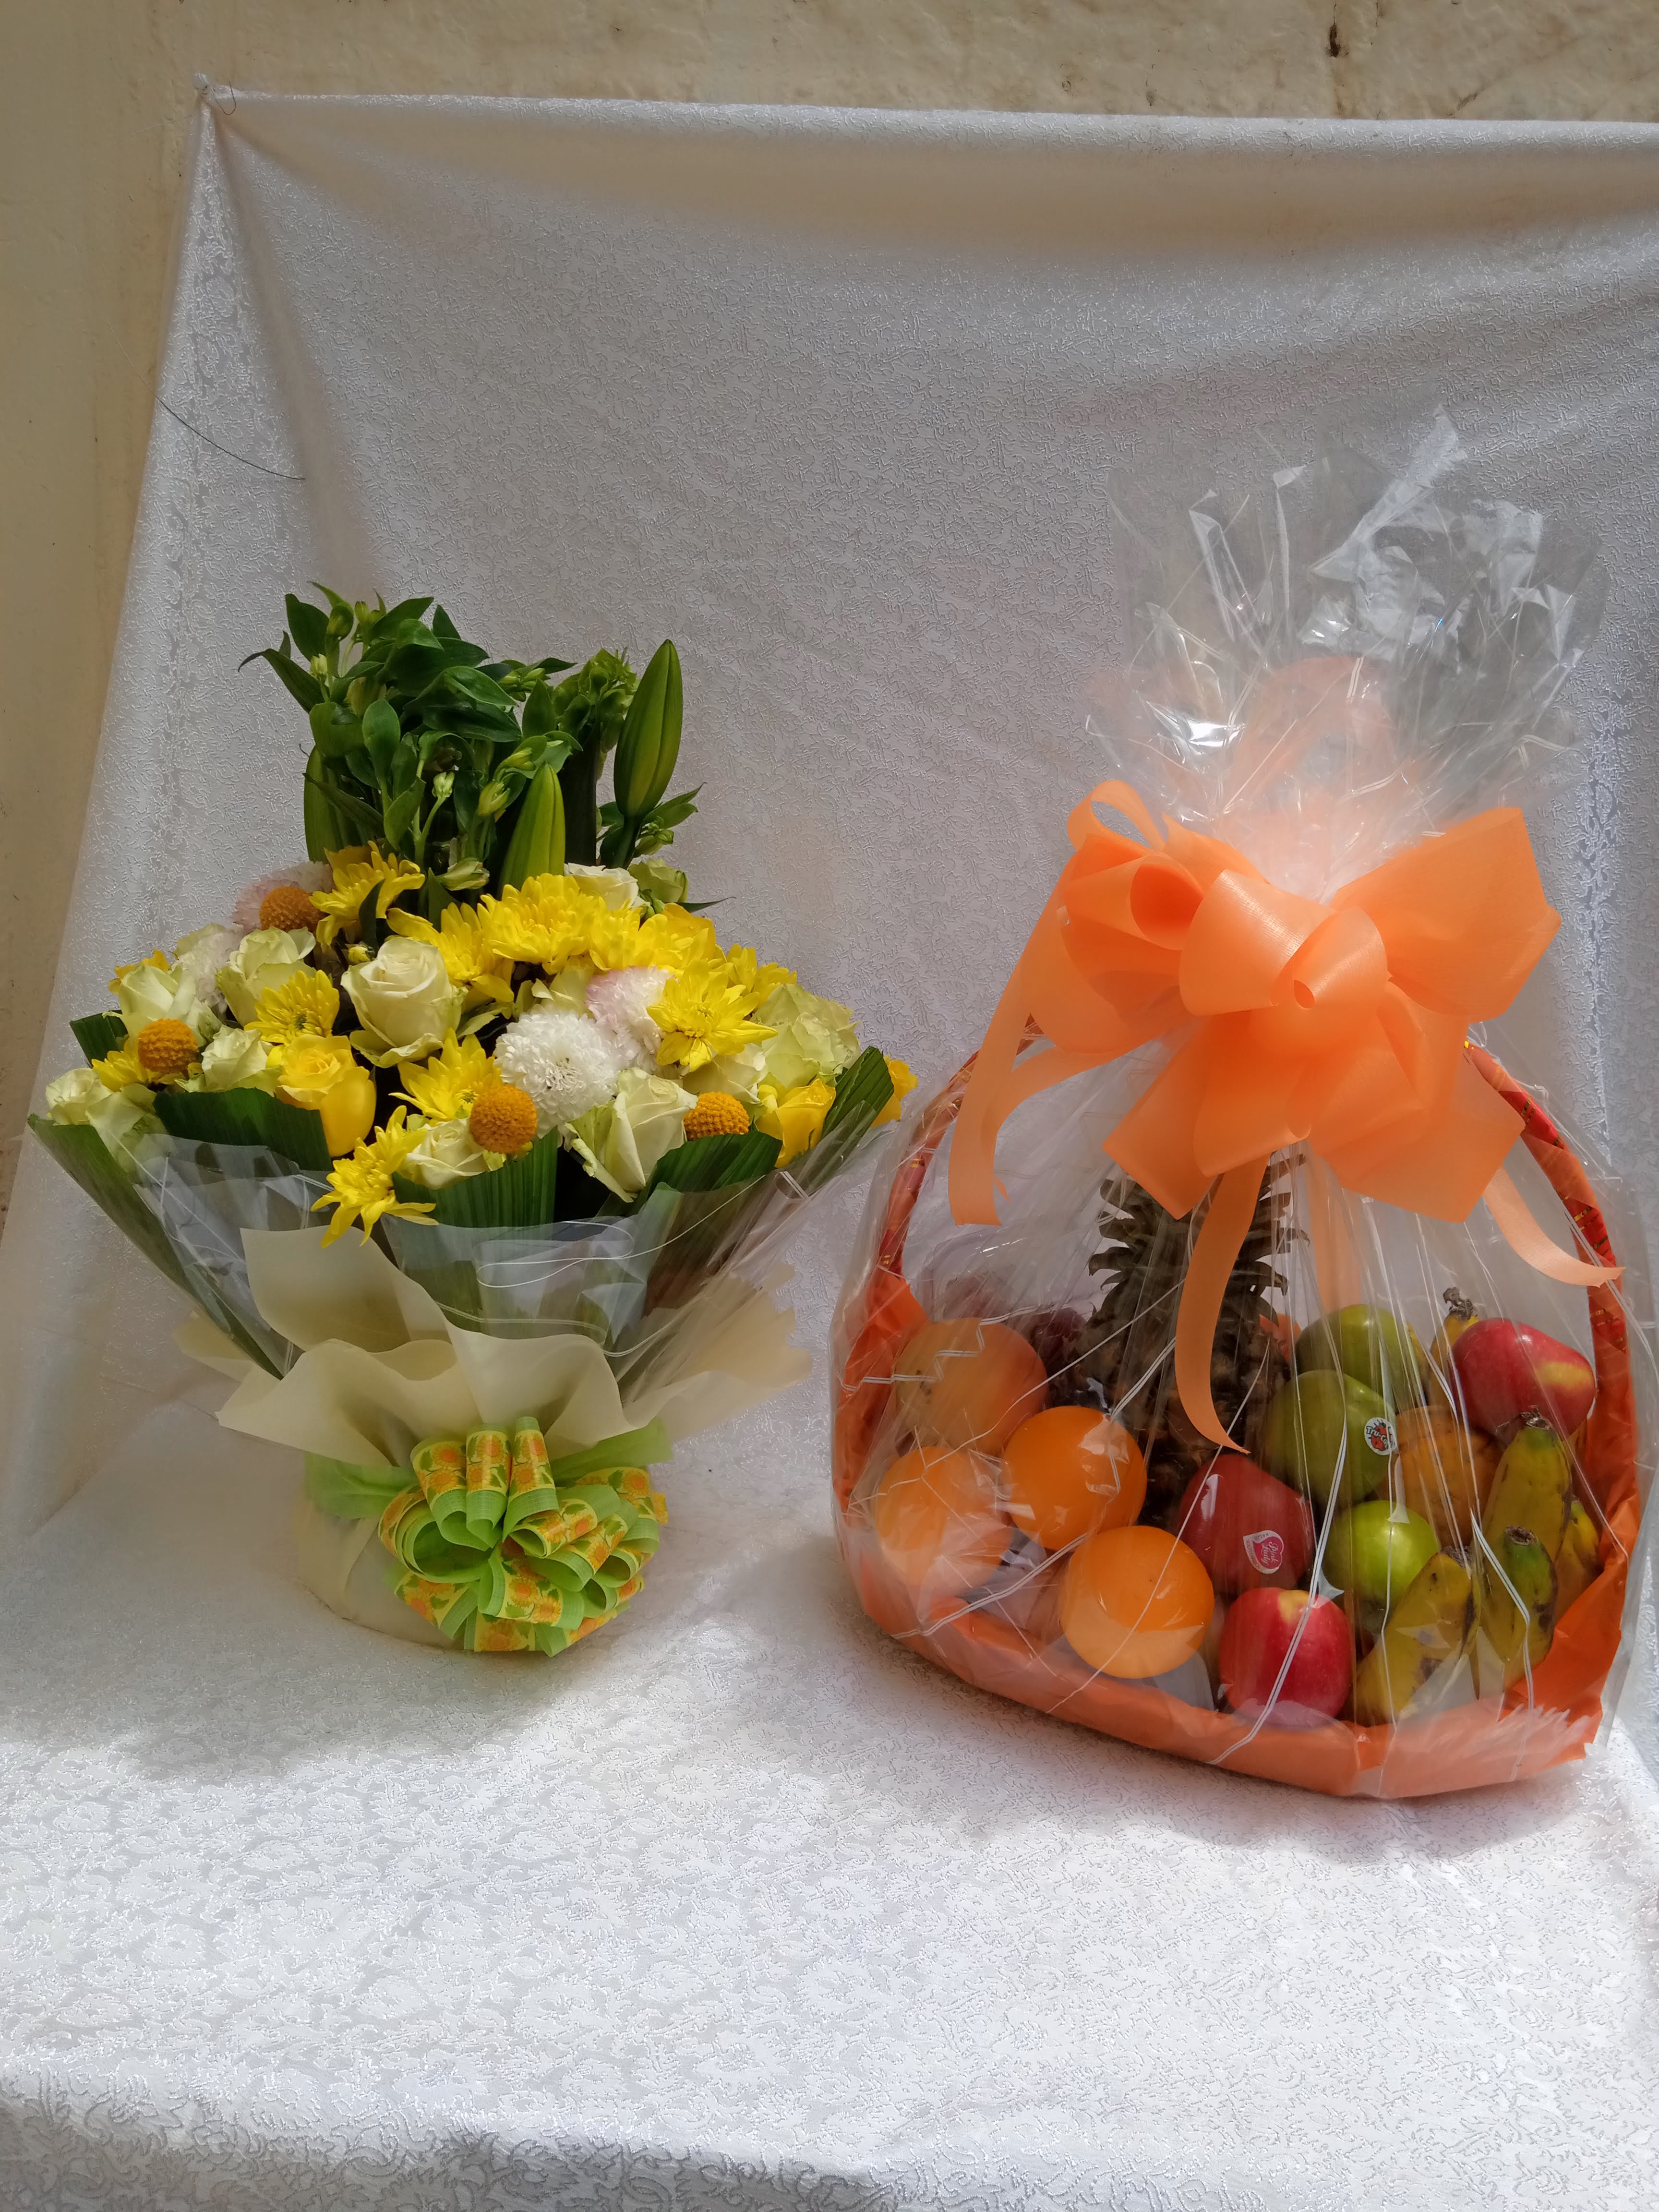 Fruits and flowers hamper